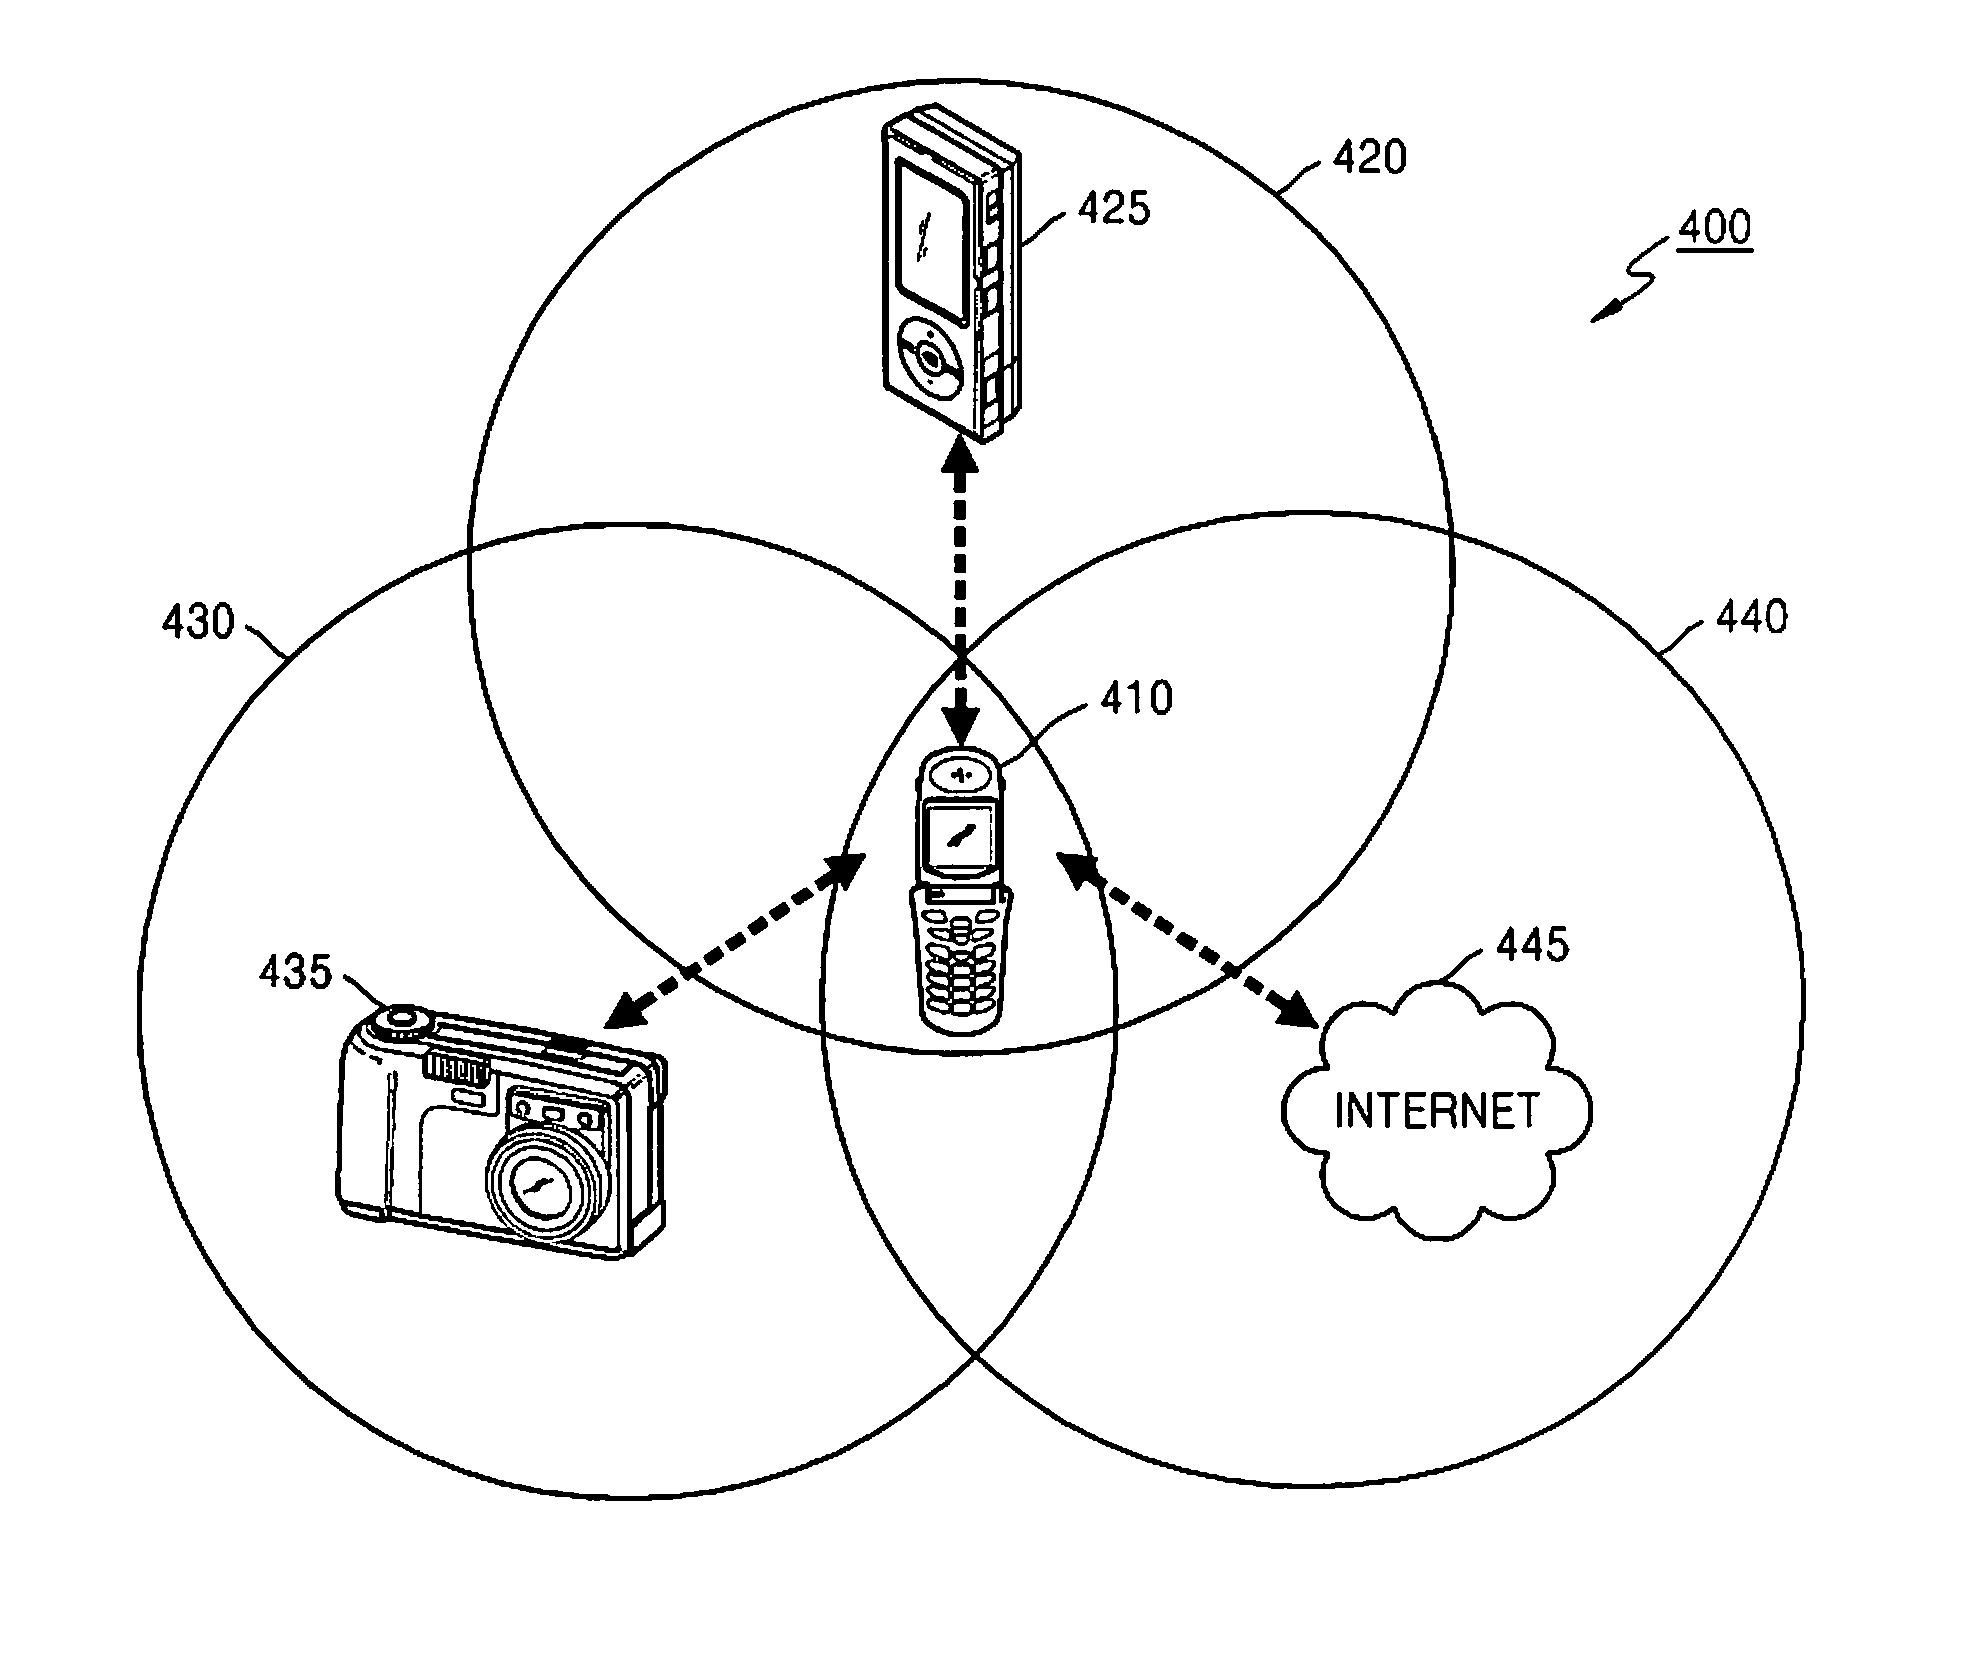 Method and apparatus for sharing function of external device through complex network